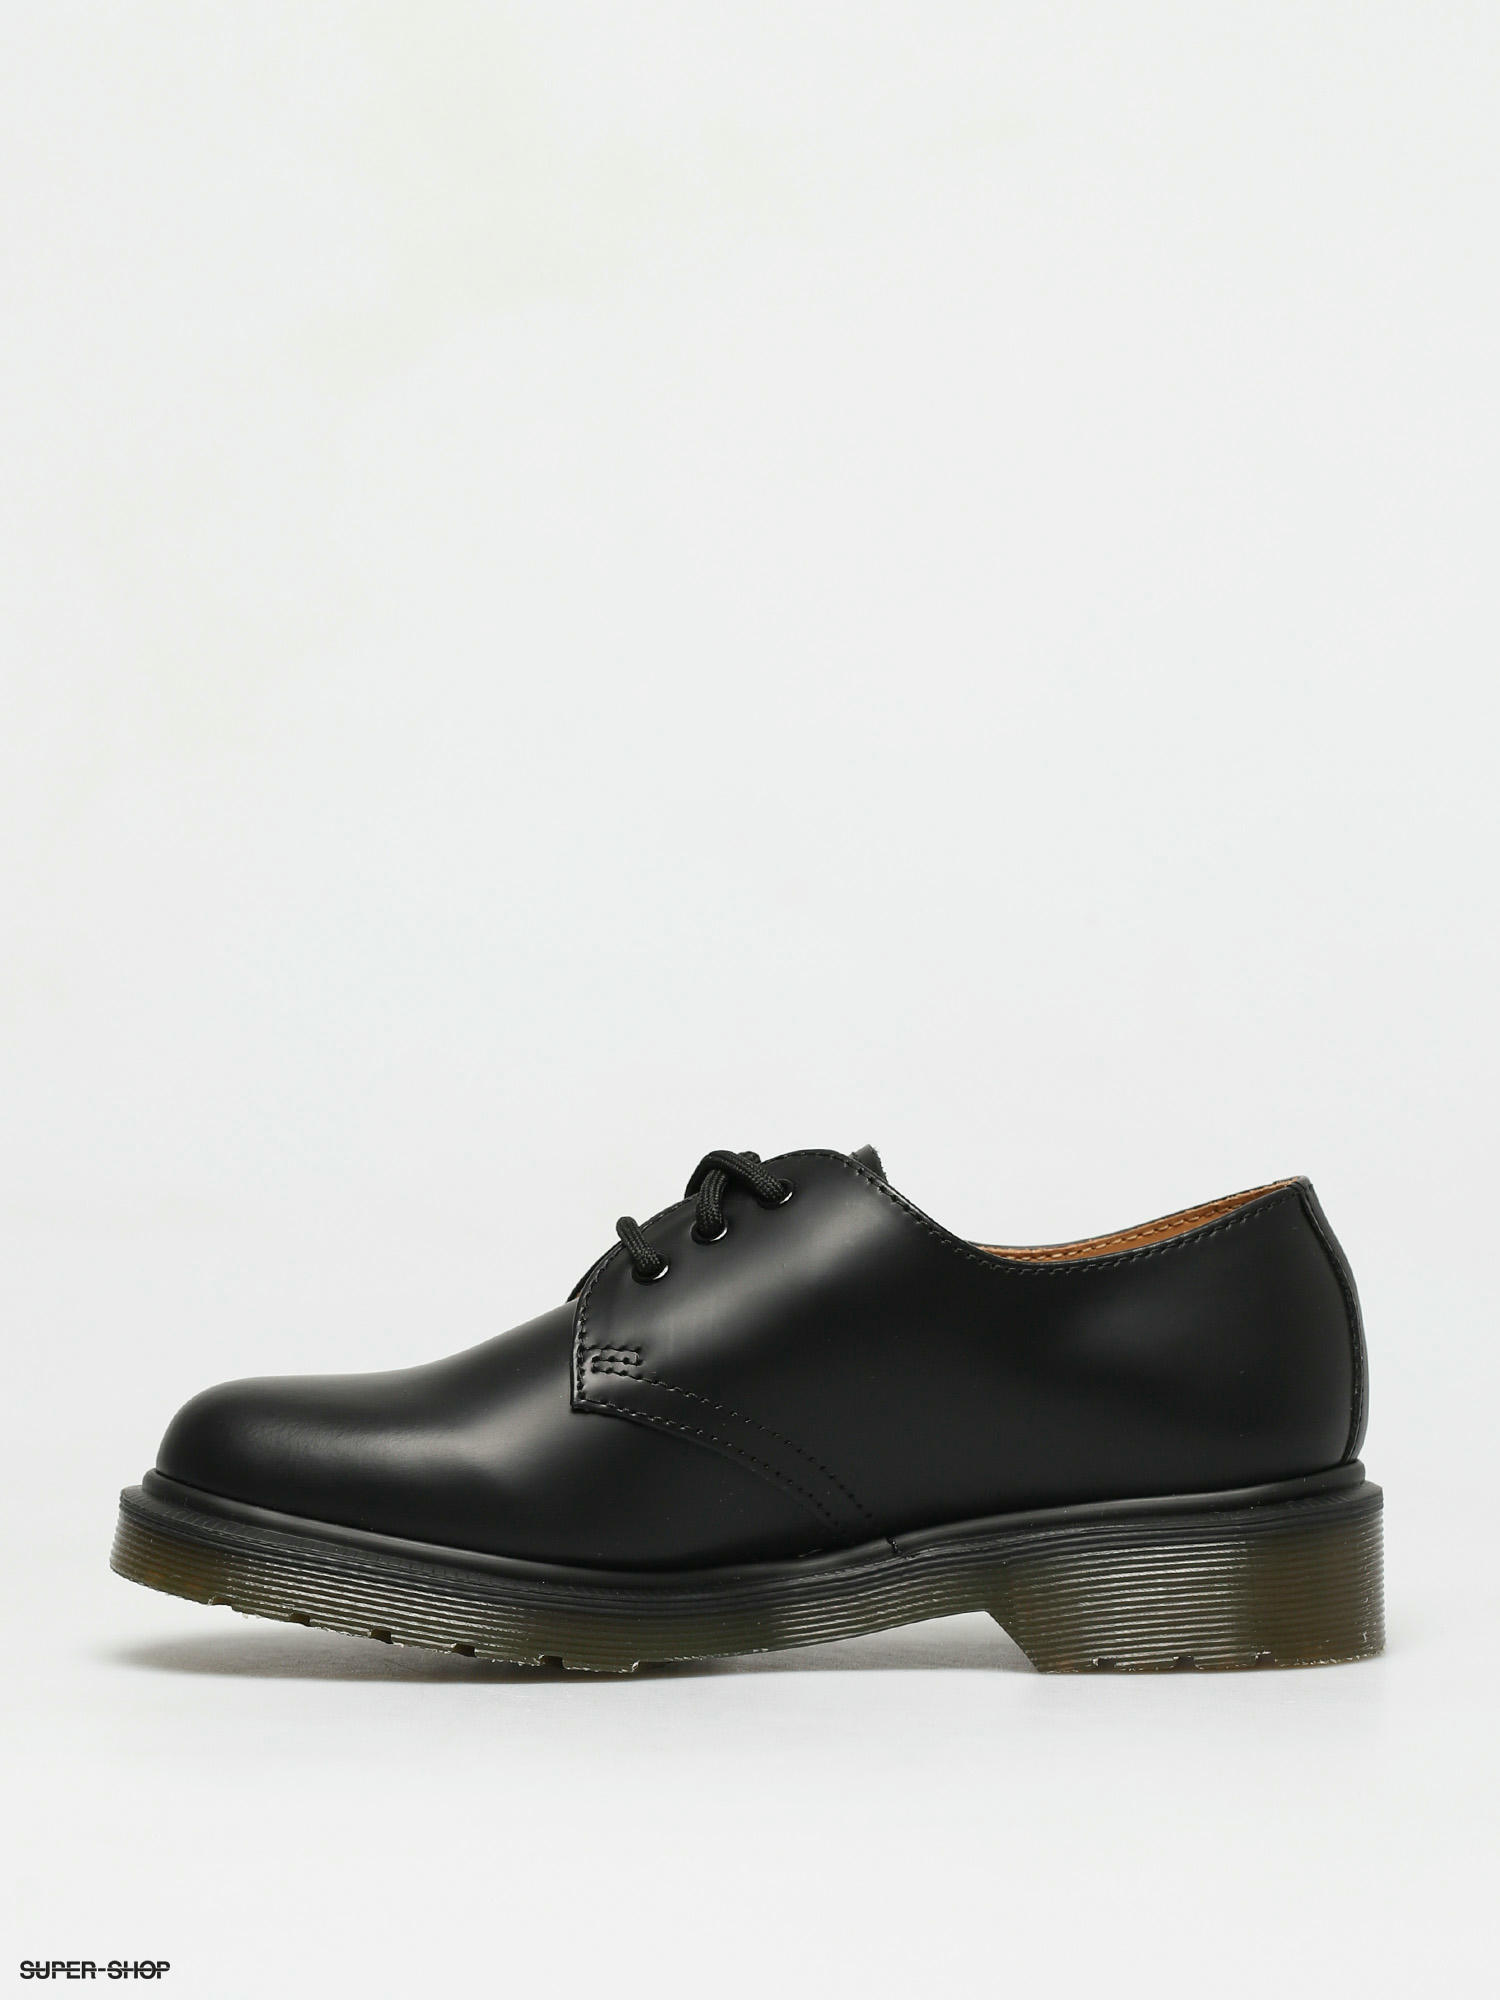 Dr. Martens 1461 Pw Shoes (black smooth)